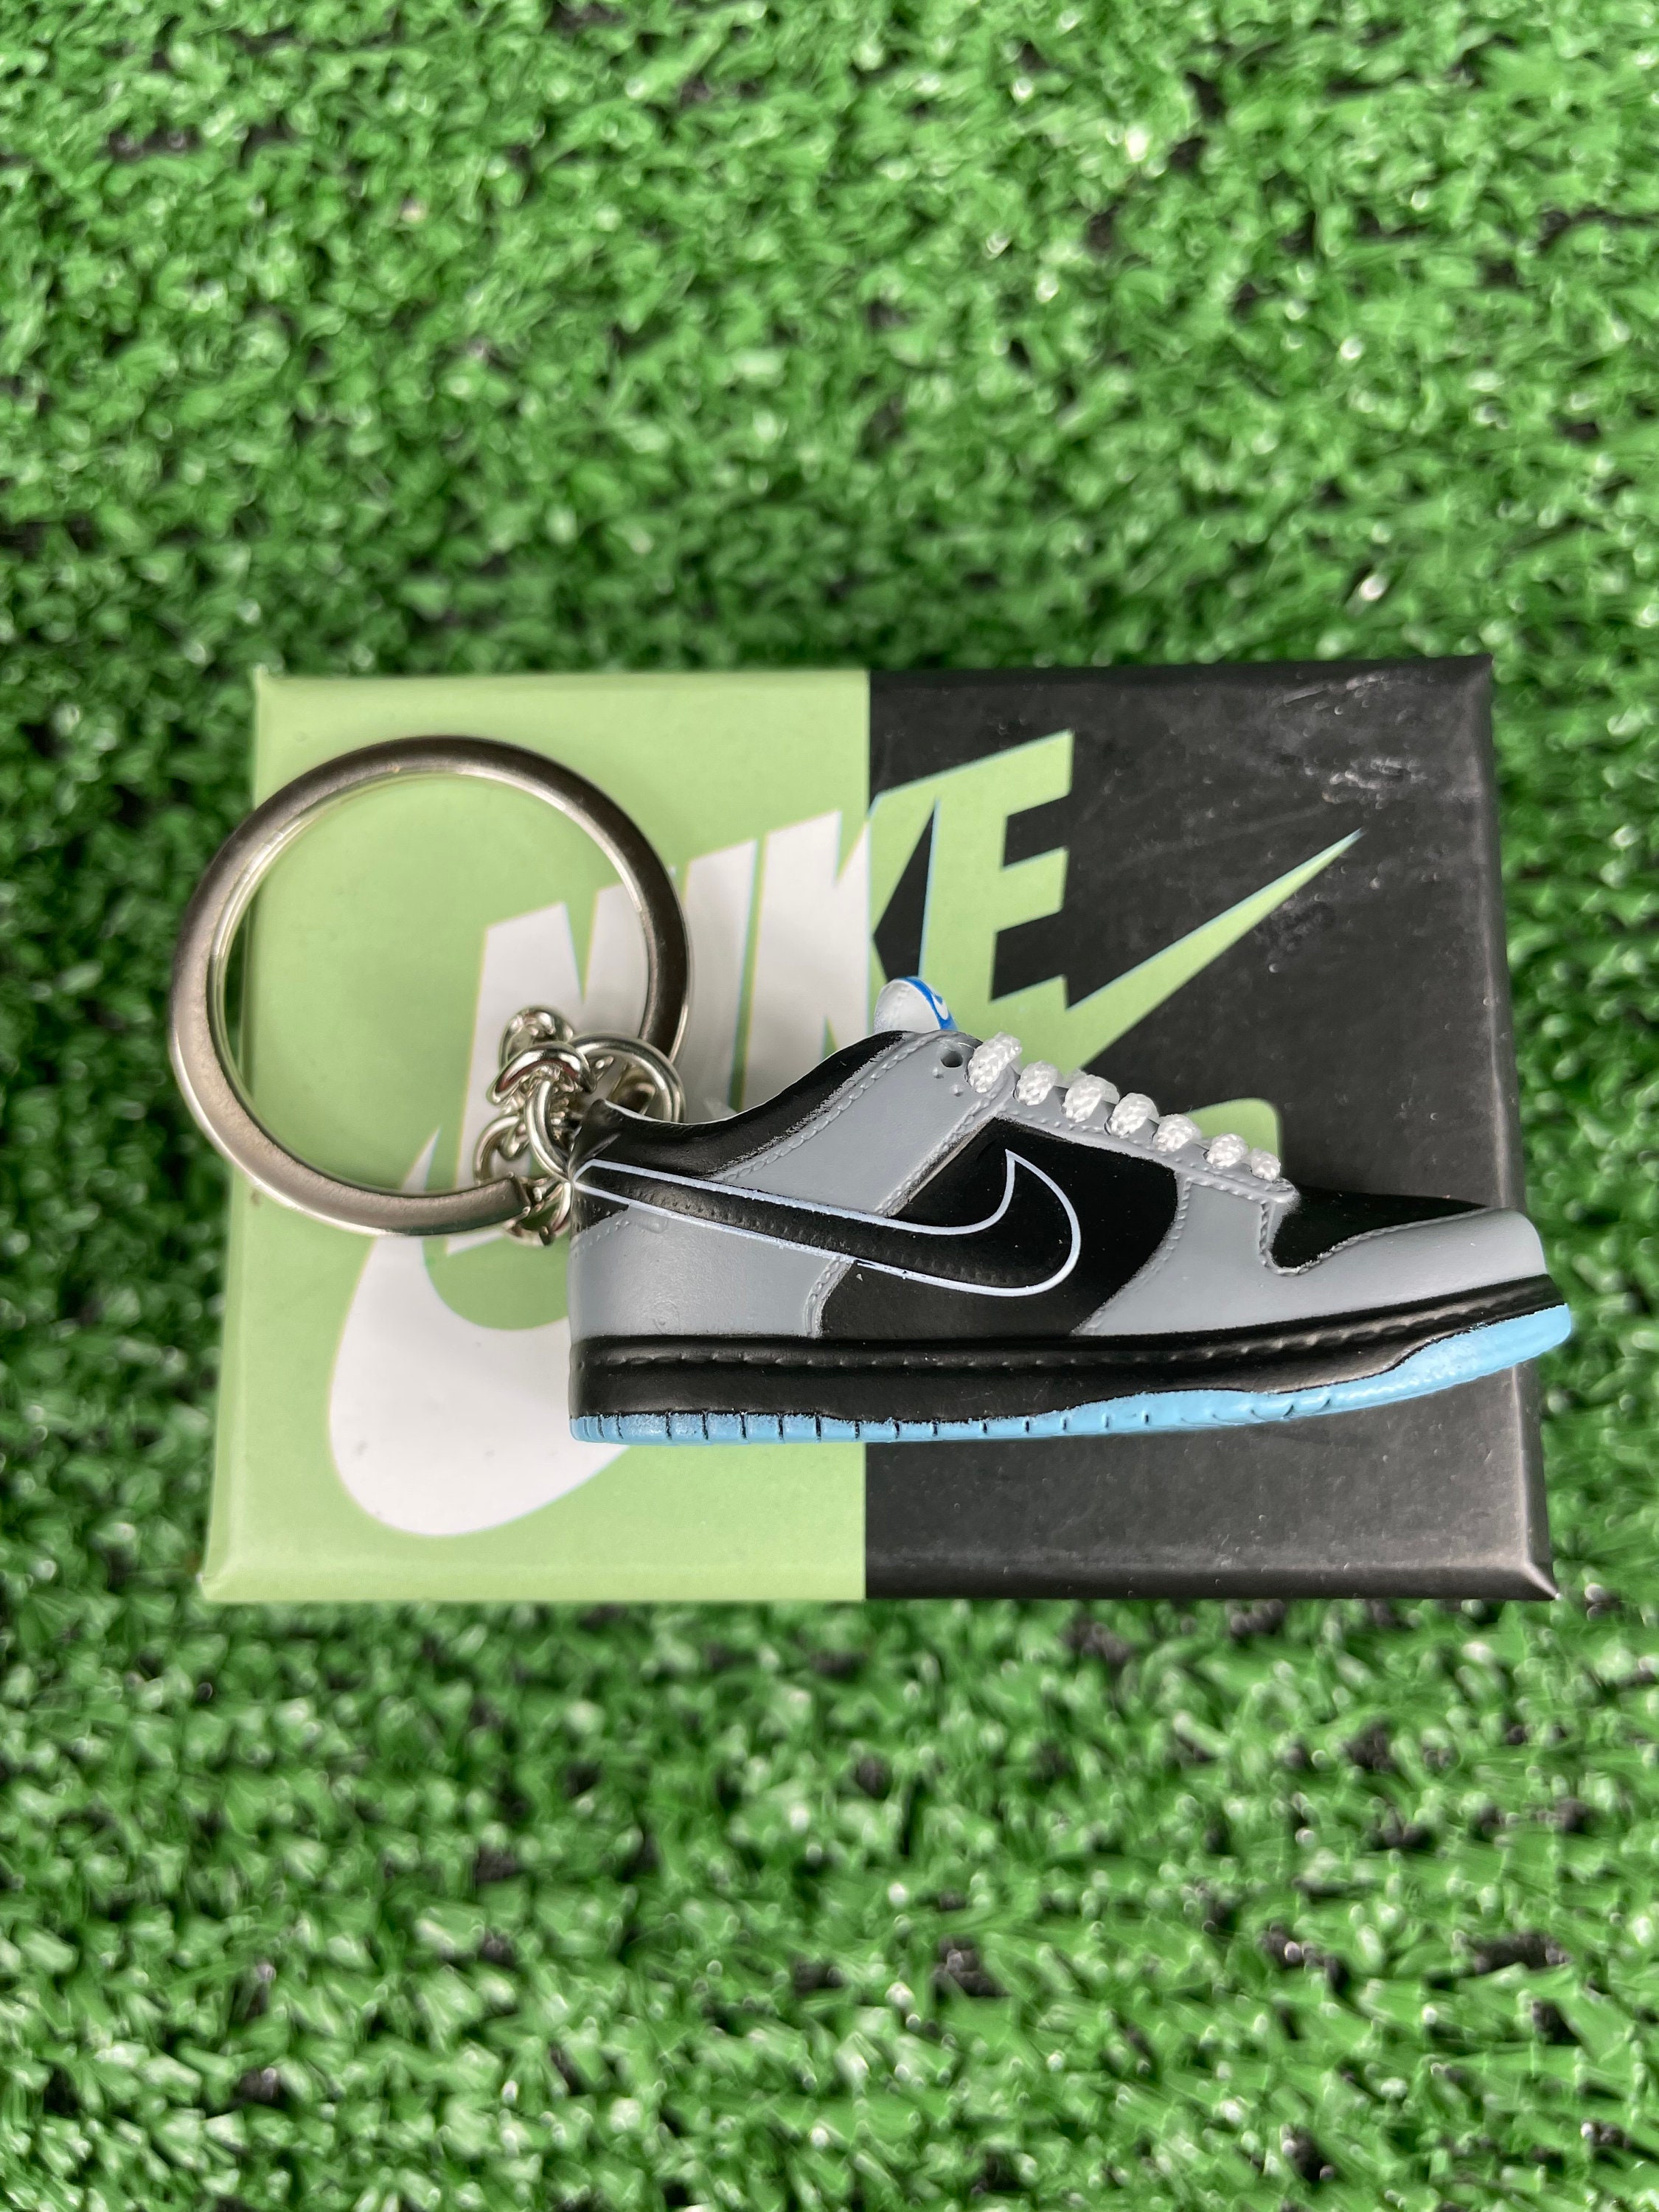 Thorns Dubraes Shoe Lace Locks for Dunk SB Buckle Tag Travis Dunk